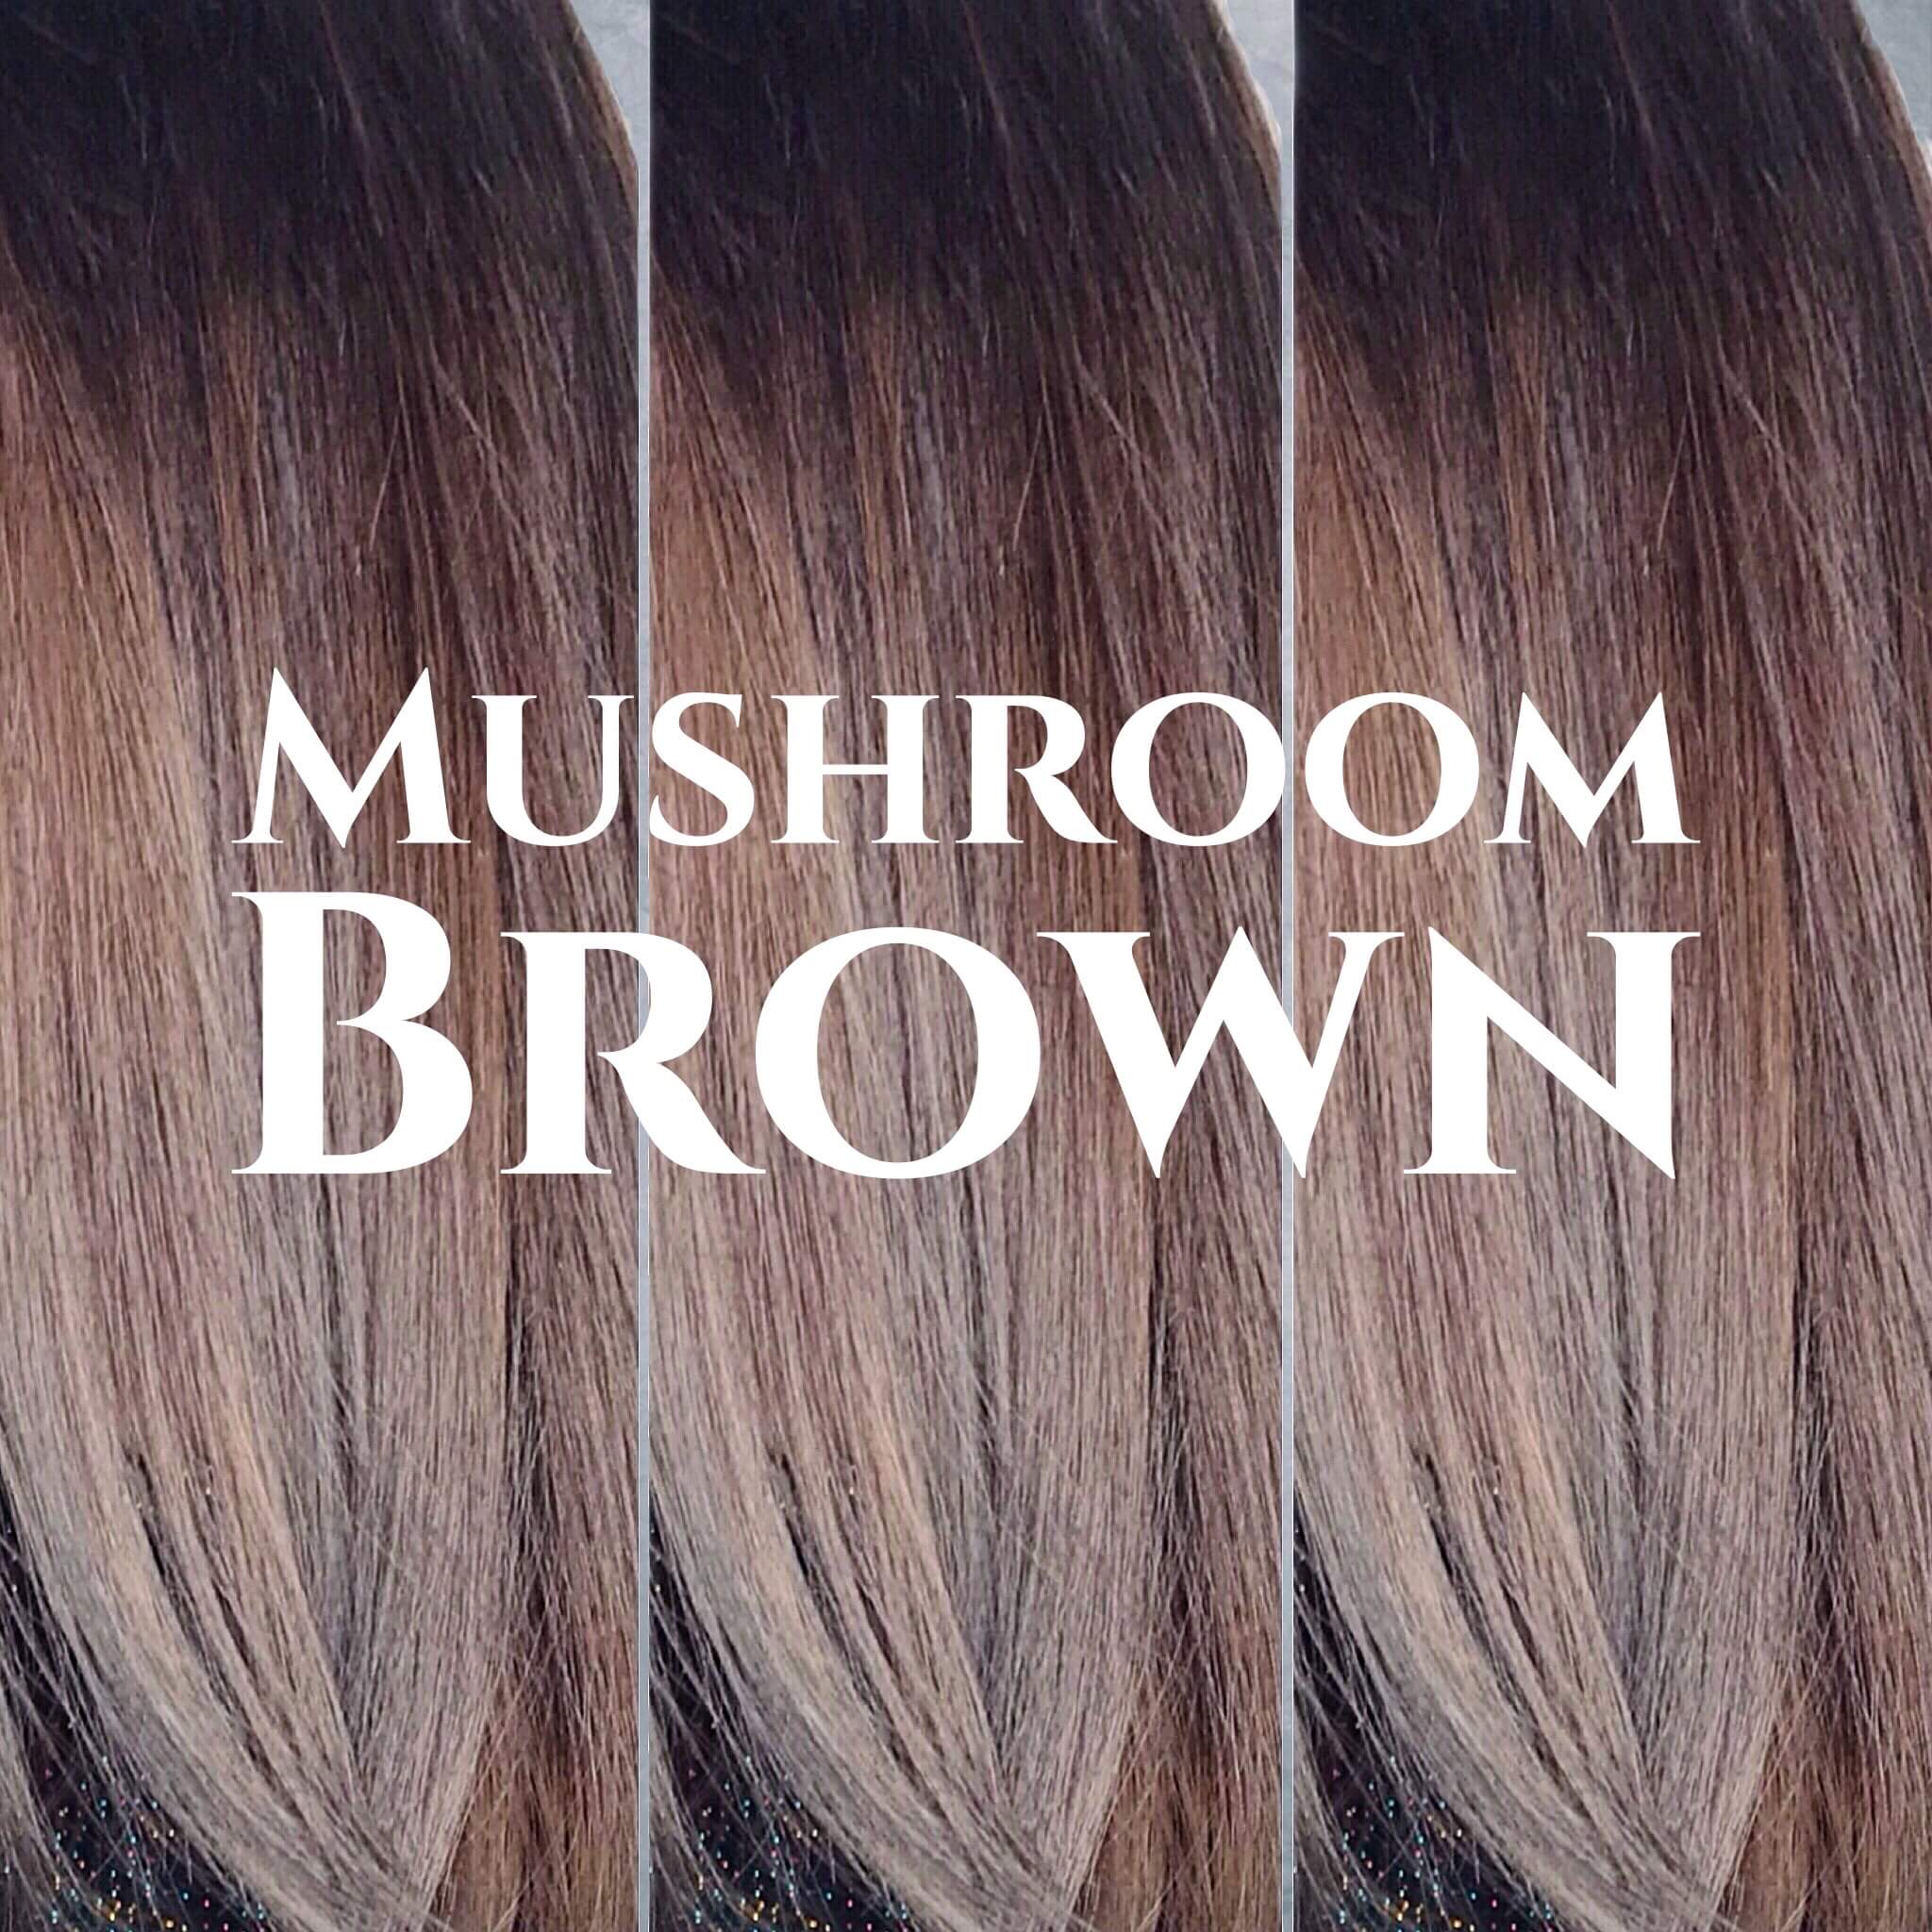 10 cool & stunning mushroom brown hair colouring ideas you will love | Top  Leading Hair Salon in Singapore and Orchard | Chez Vous